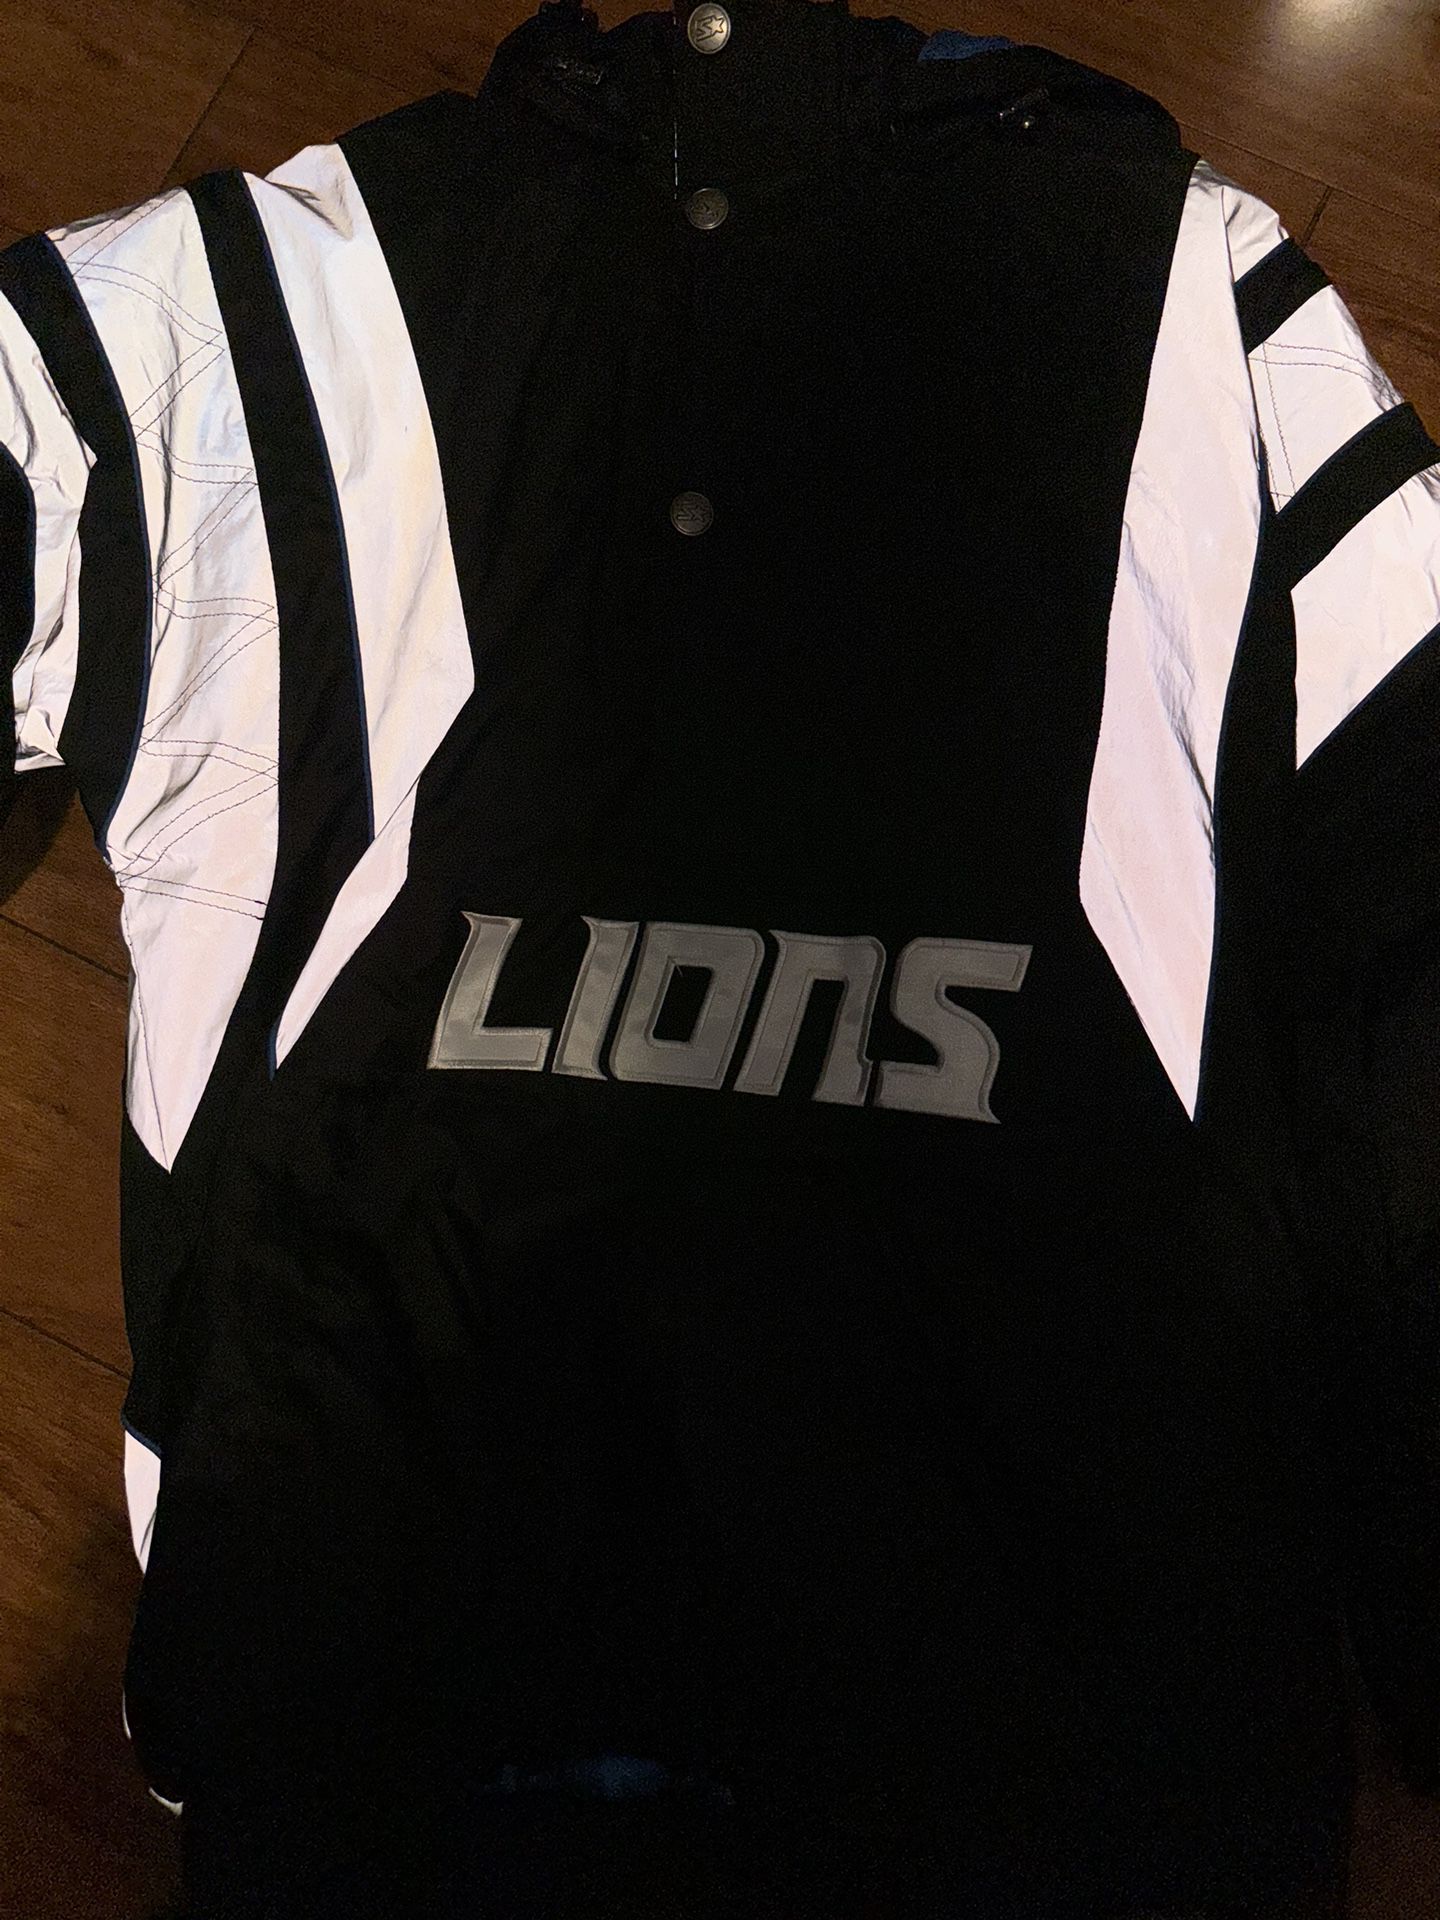 starter lions jacket size small fits M